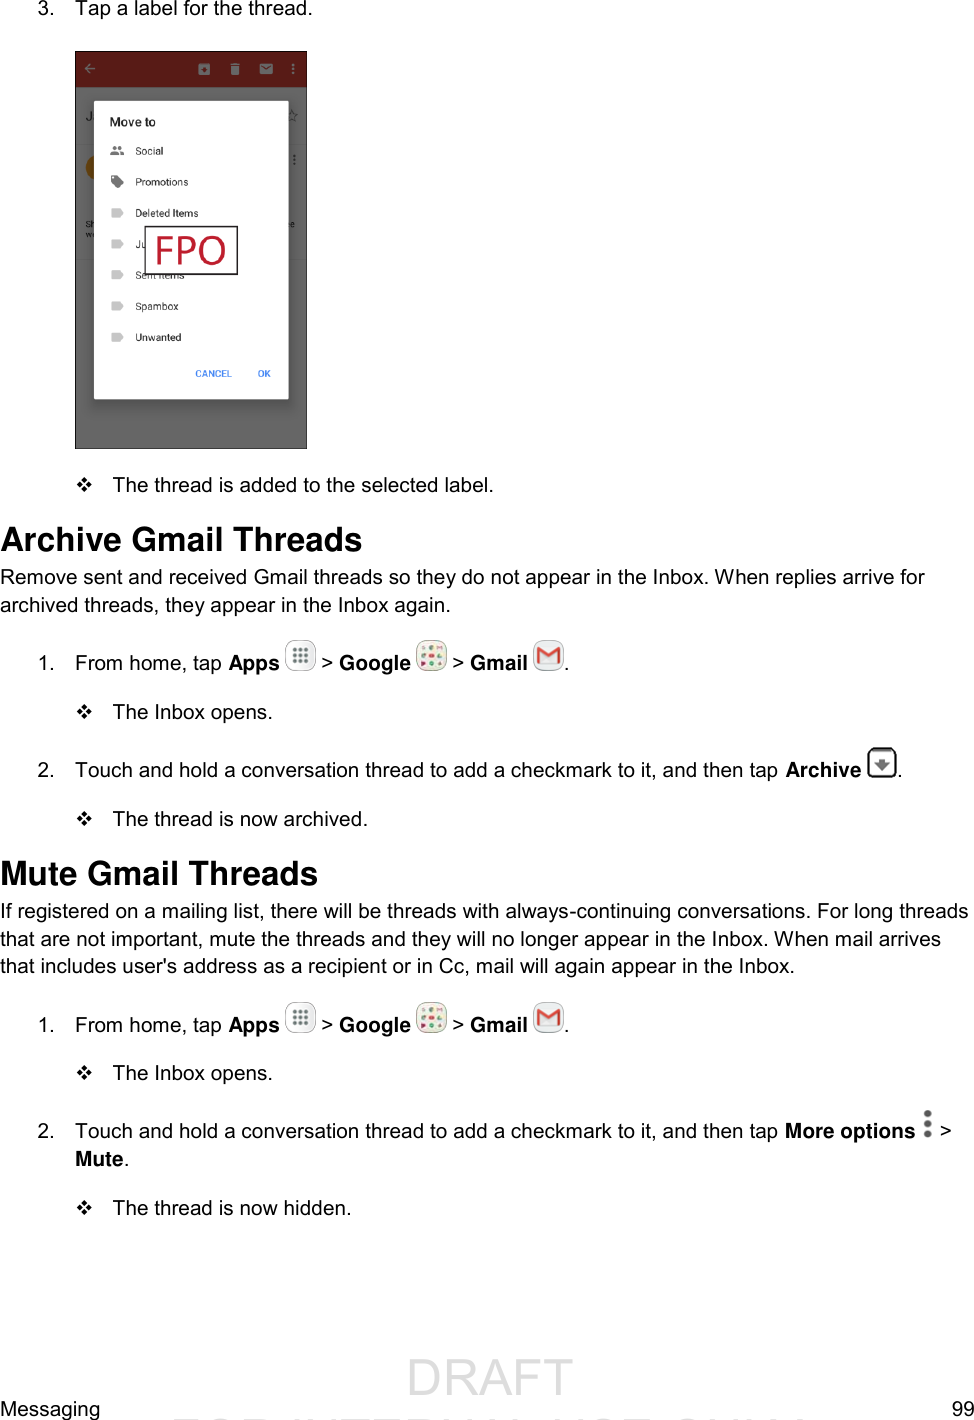                  DRAFT FOR INTERNAL USE ONLYMessaging  99 3.  Tap a label for the thread.      The thread is added to the selected label. Archive Gmail Threads Remove sent and received Gmail threads so they do not appear in the Inbox. When replies arrive for archived threads, they appear in the Inbox again. 1.  From home, tap Apps   &gt; Google   &gt; Gmail  .   The Inbox opens. 2.  Touch and hold a conversation thread to add a checkmark to it, and then tap Archive  .    The thread is now archived. Mute Gmail Threads If registered on a mailing list, there will be threads with always-continuing conversations. For long threads that are not important, mute the threads and they will no longer appear in the Inbox. When mail arrives that includes user&apos;s address as a recipient or in Cc, mail will again appear in the Inbox. 1.  From home, tap Apps   &gt; Google   &gt; Gmail  .   The Inbox opens. 2.  Touch and hold a conversation thread to add a checkmark to it, and then tap More options   &gt; Mute.    The thread is now hidden. 